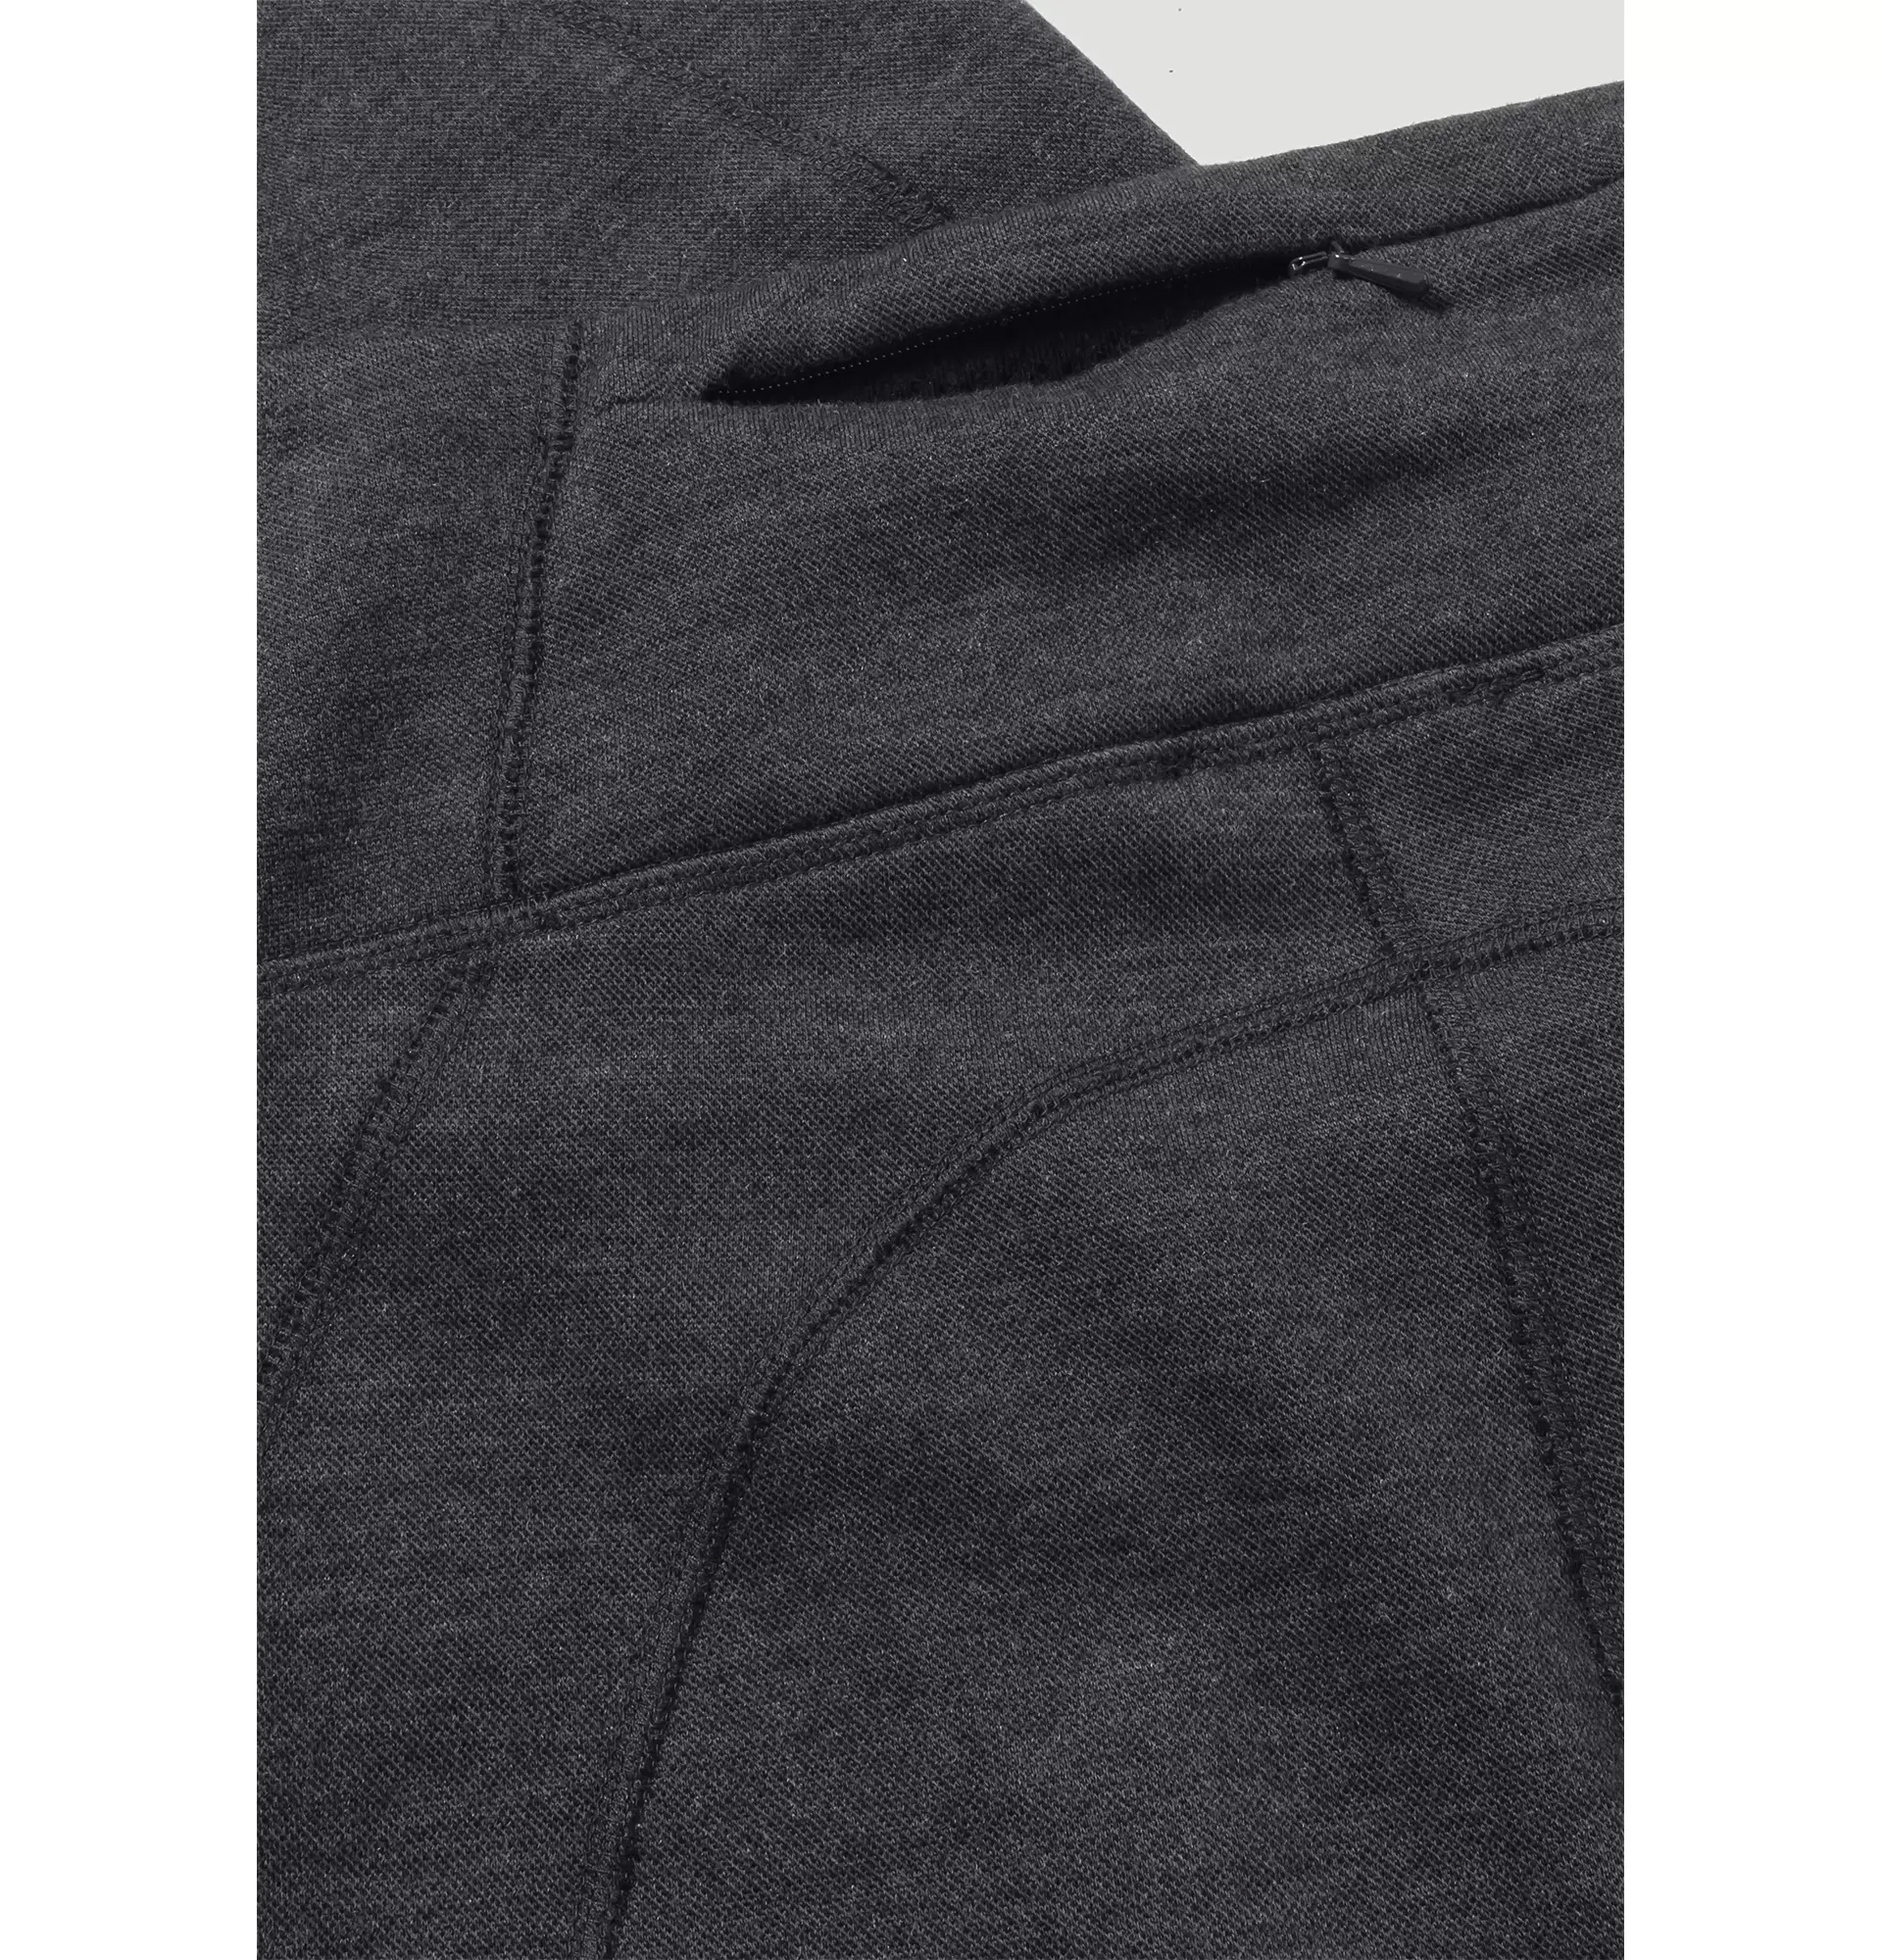 Leggings Fitted Medium Cut ACTIVE FUNCTIONAL made of organic merino wool  with organic cotton 5299588